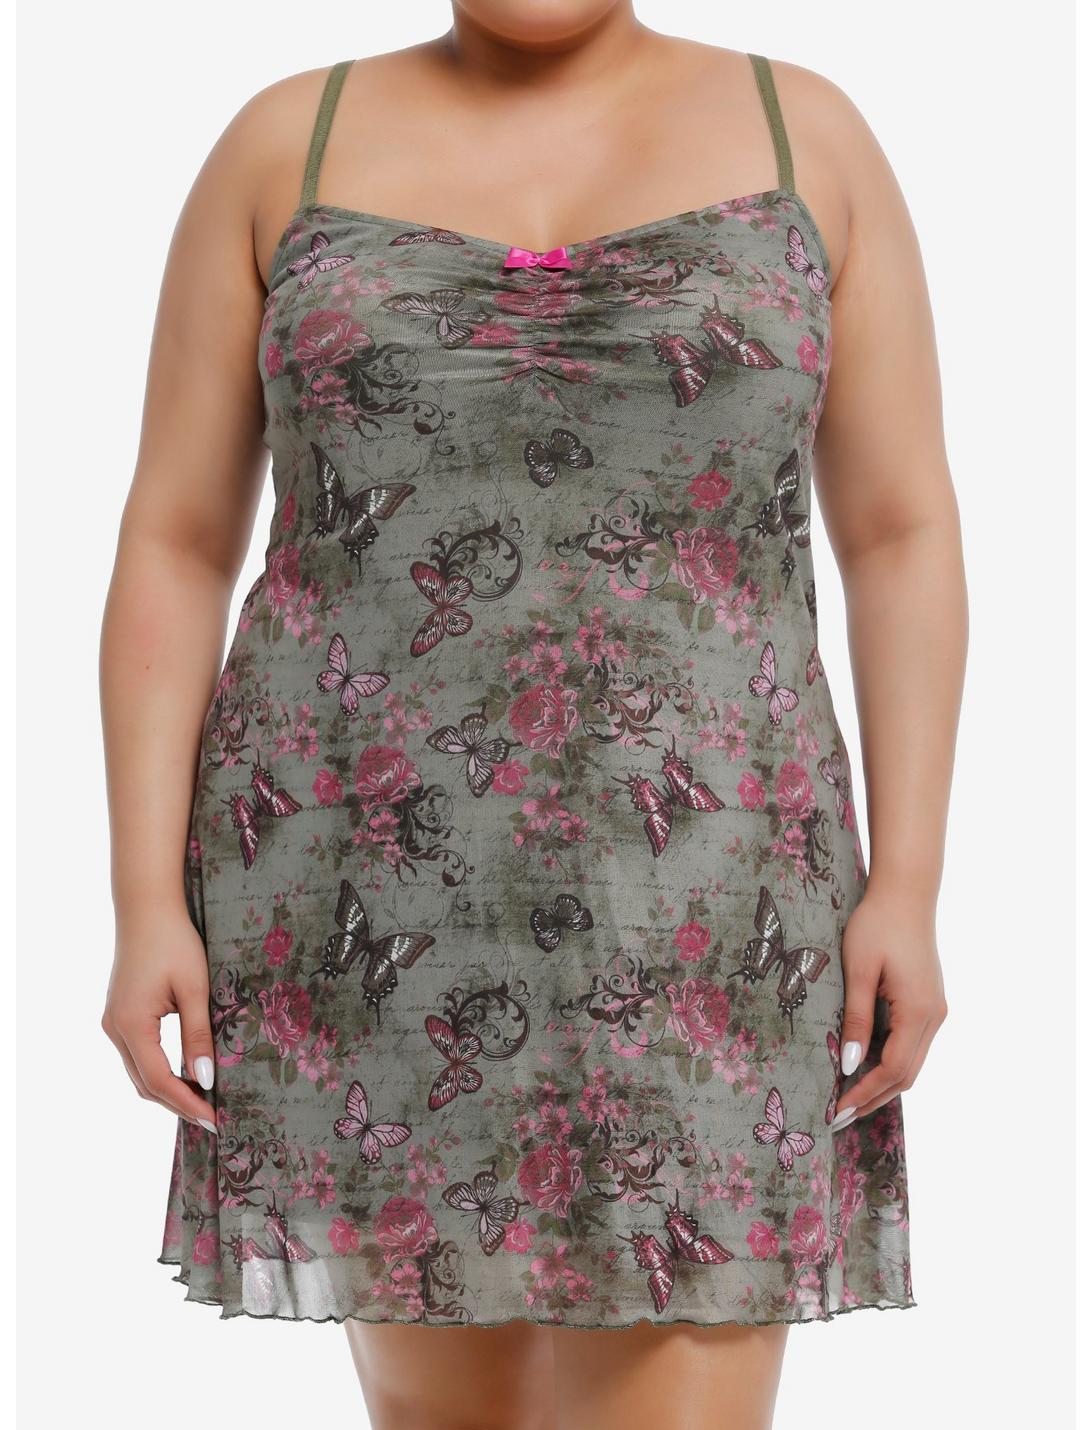 Sweet Society Pink & Green Butterfly Mesh Cami Dress Plus Size, PINK, hi-res